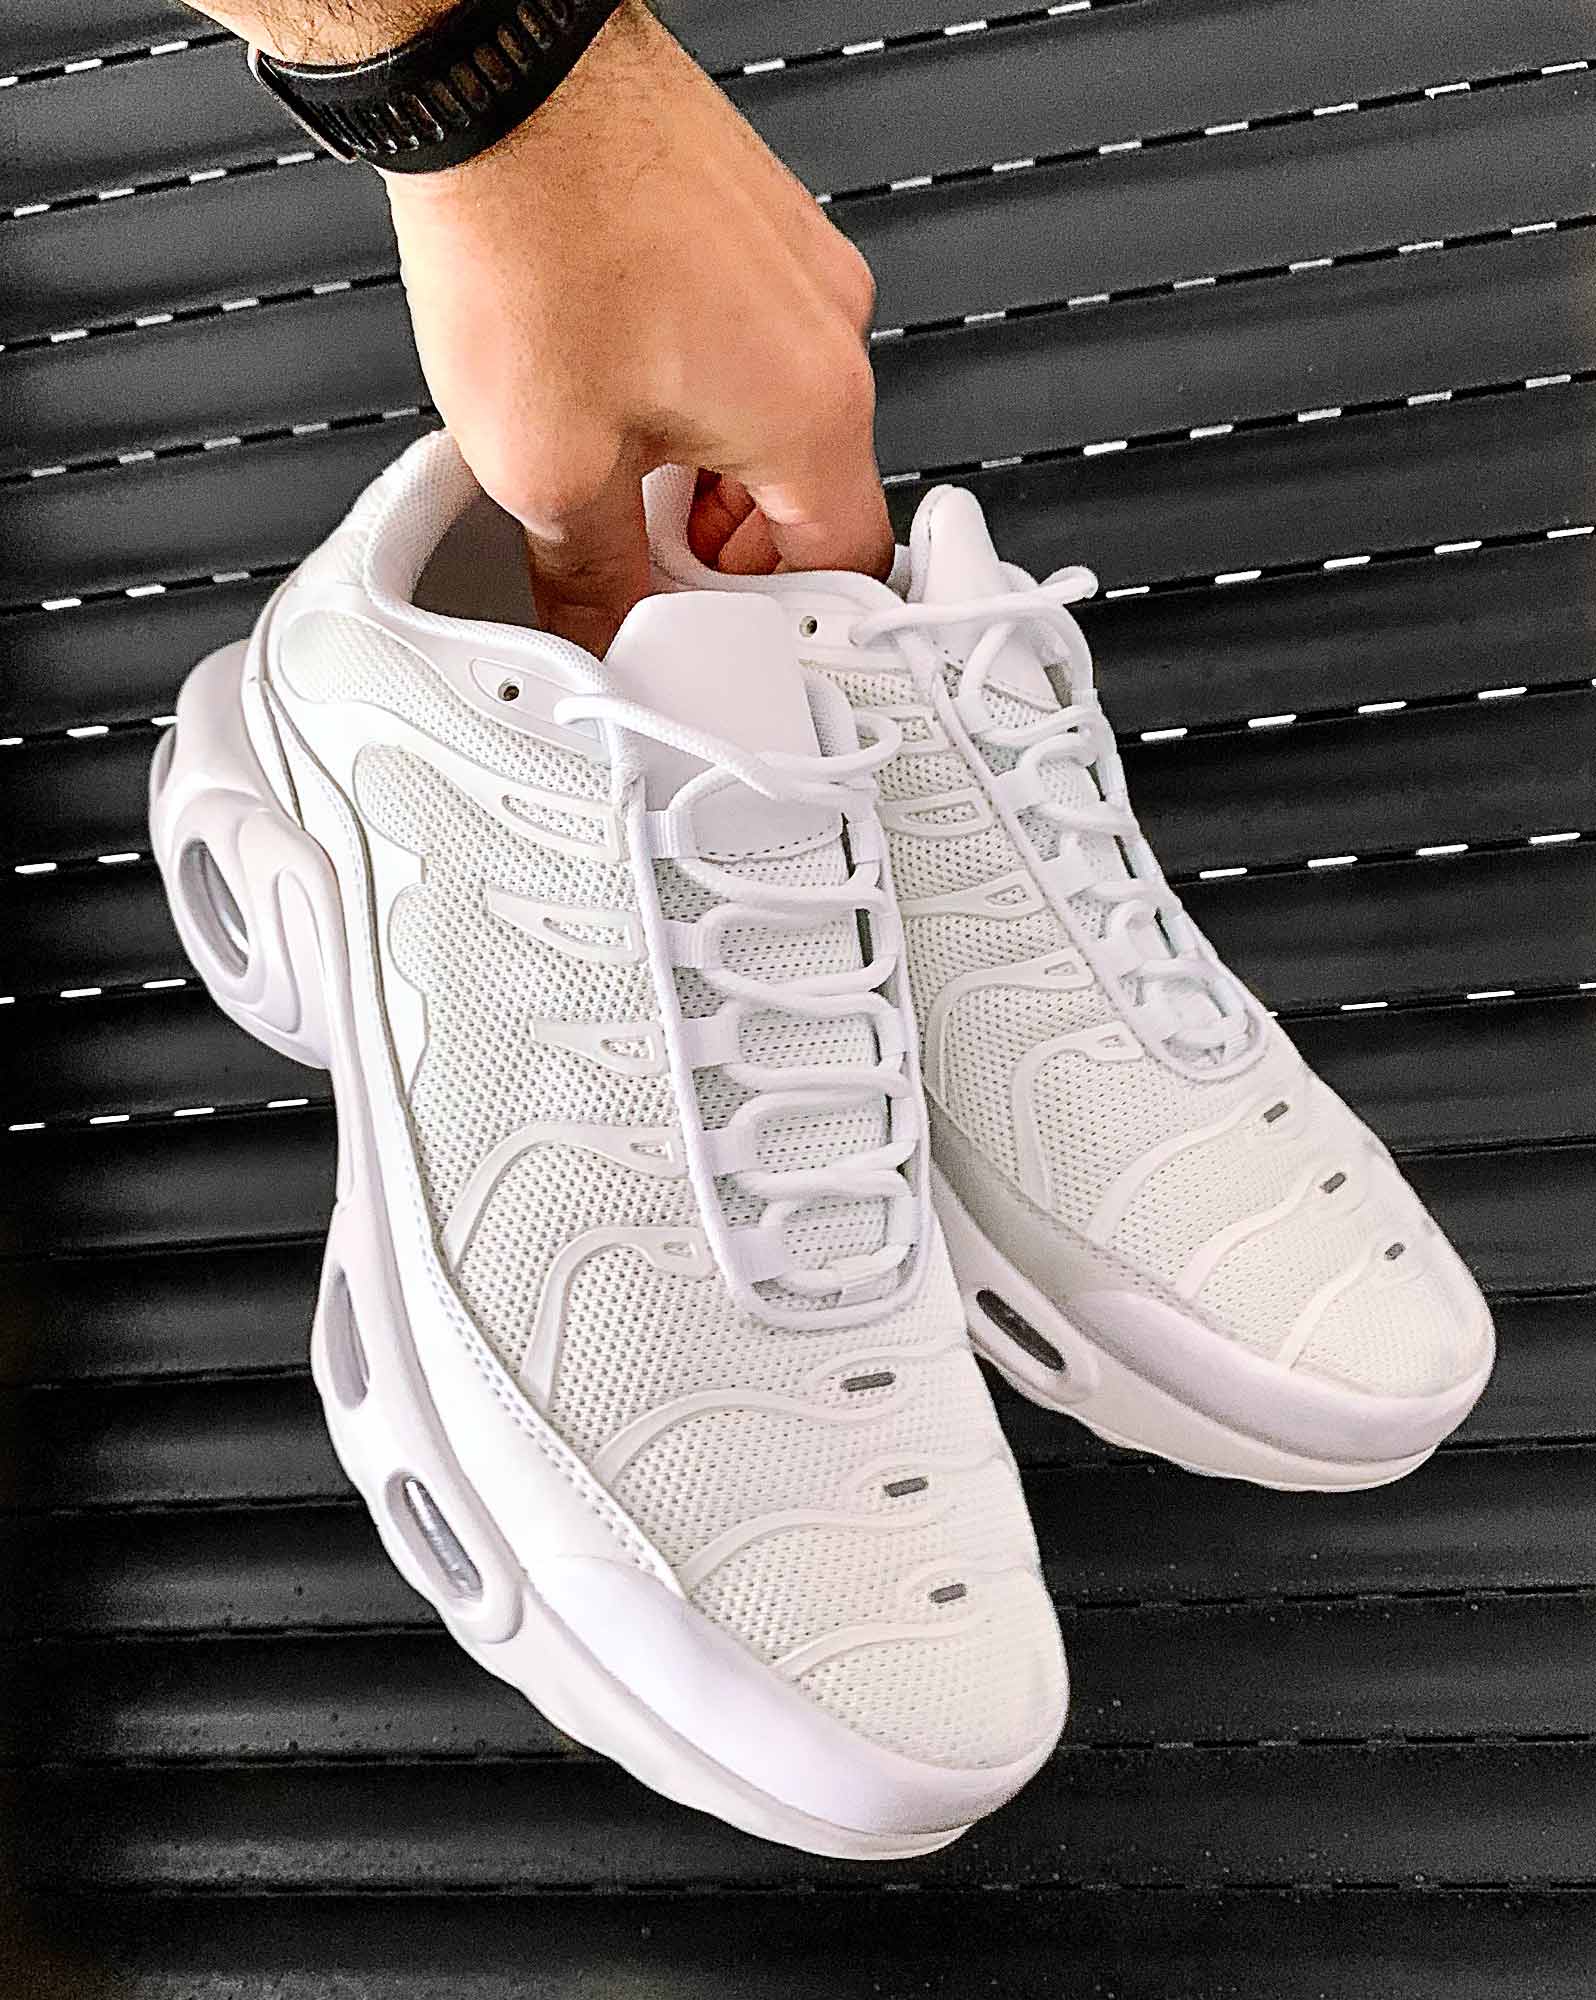 White sneaker-type shoes with air bubble effect and support insert for men